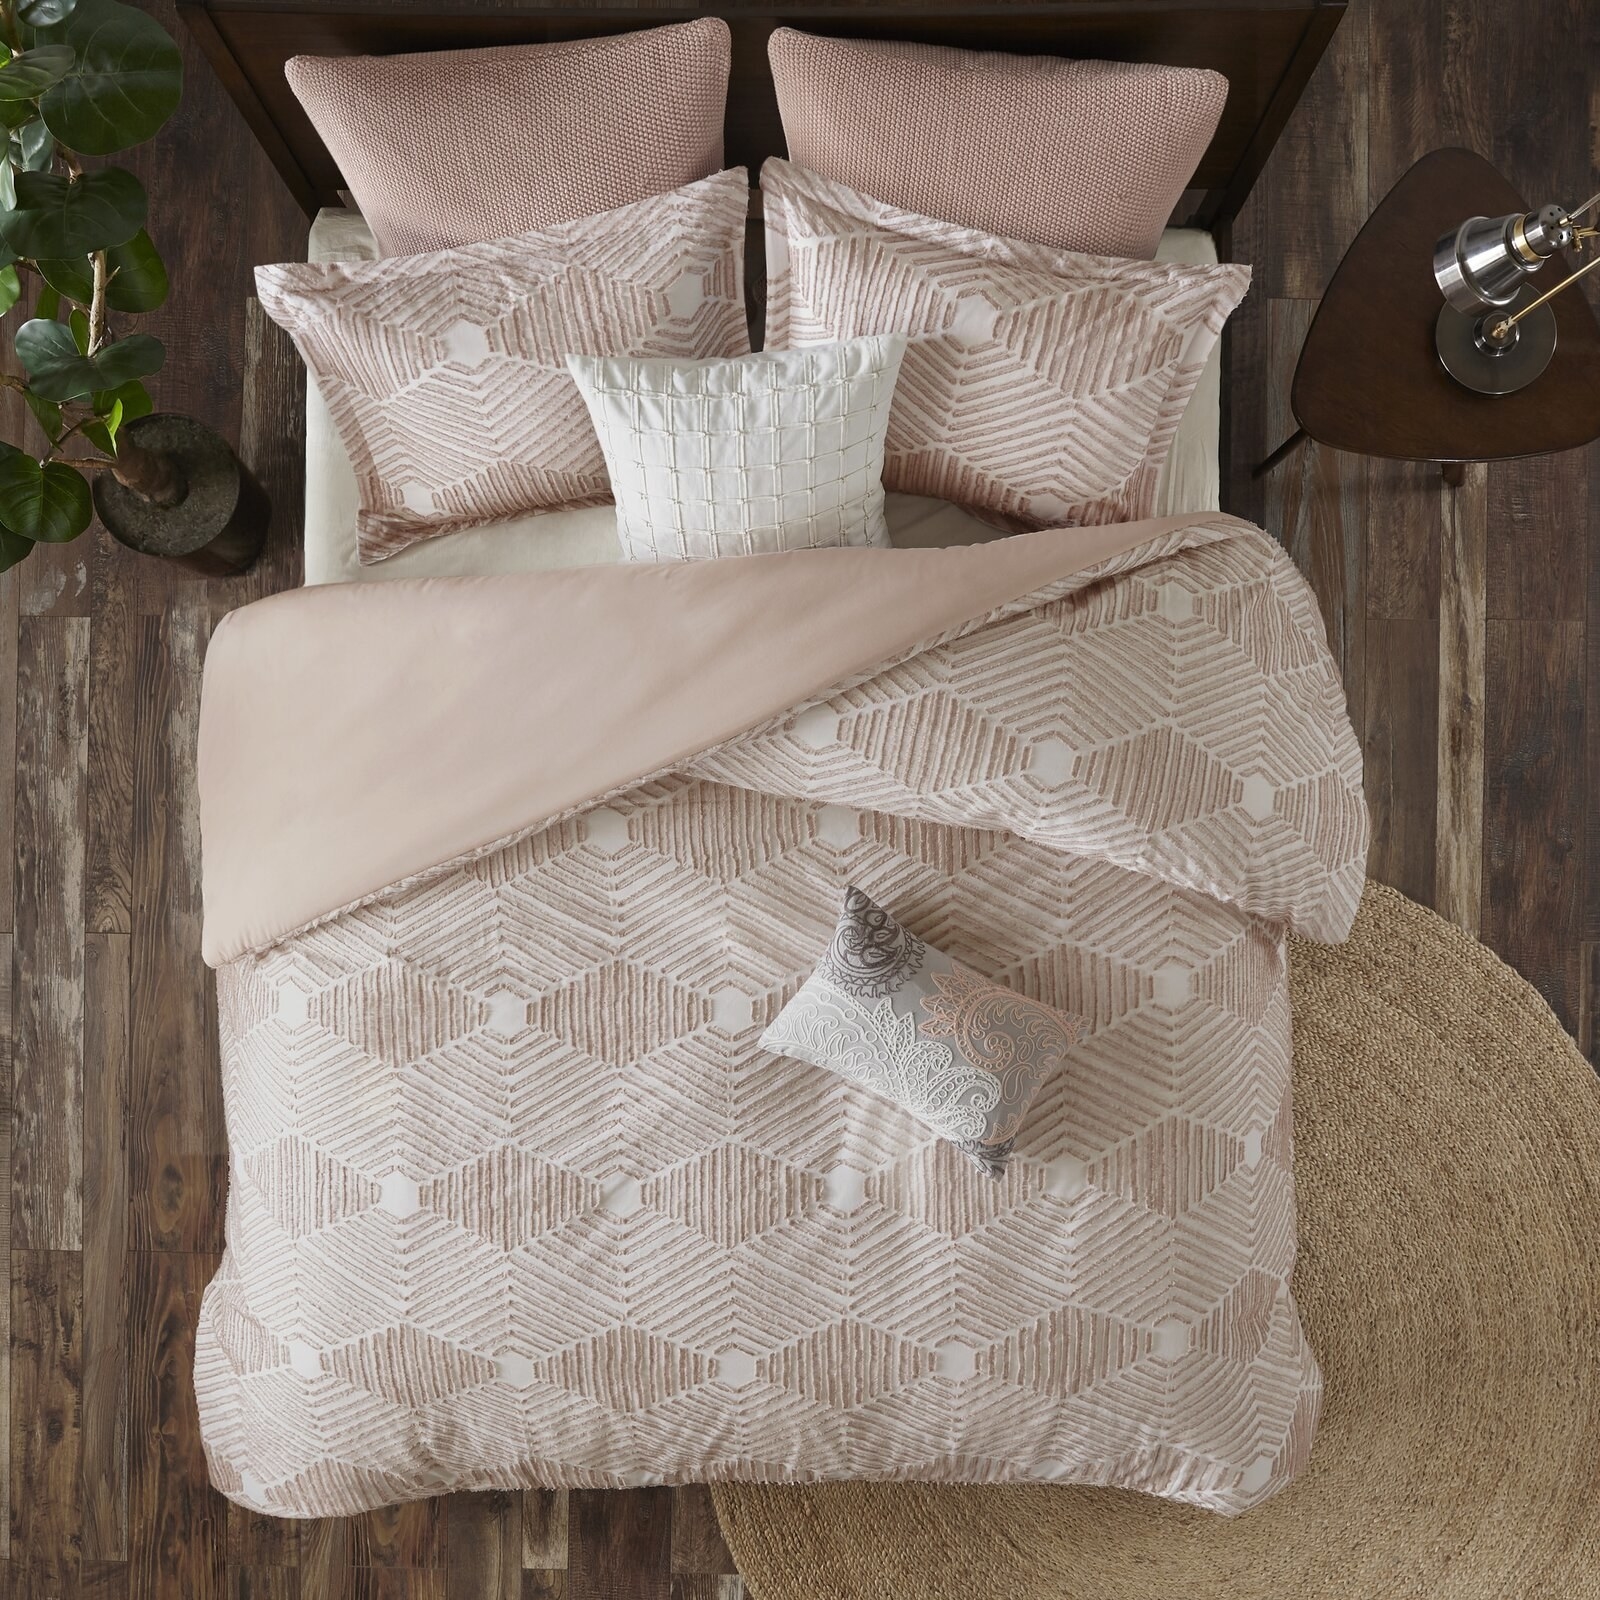 The set in blush on a bed